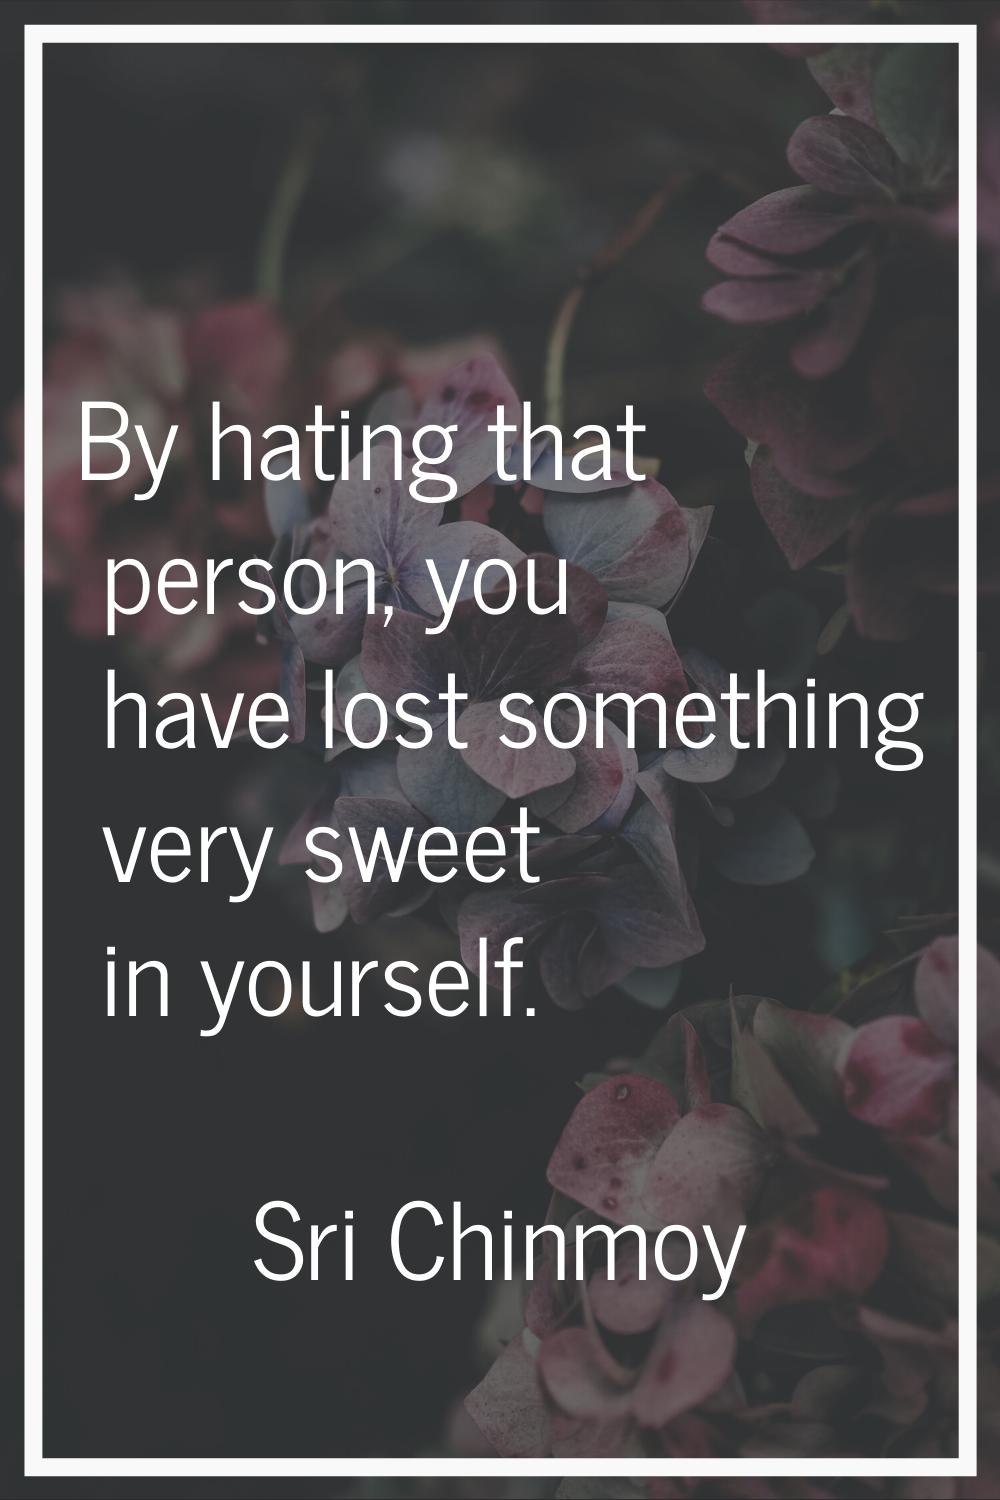 By hating that person, you have lost something very sweet in yourself.